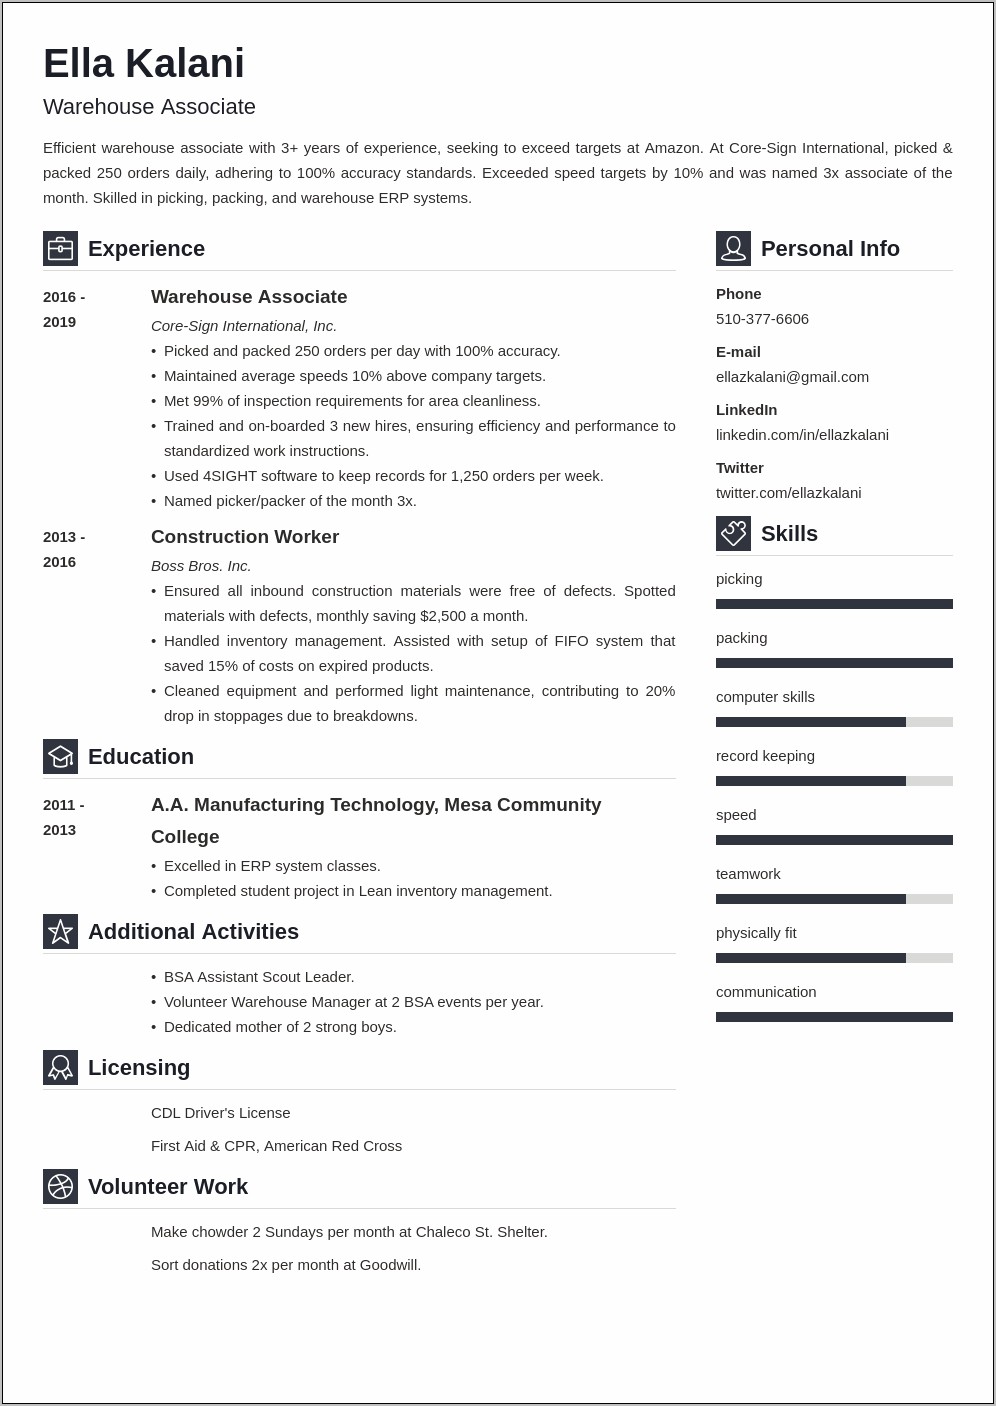 Resume Objective For Internal Promotion Examples